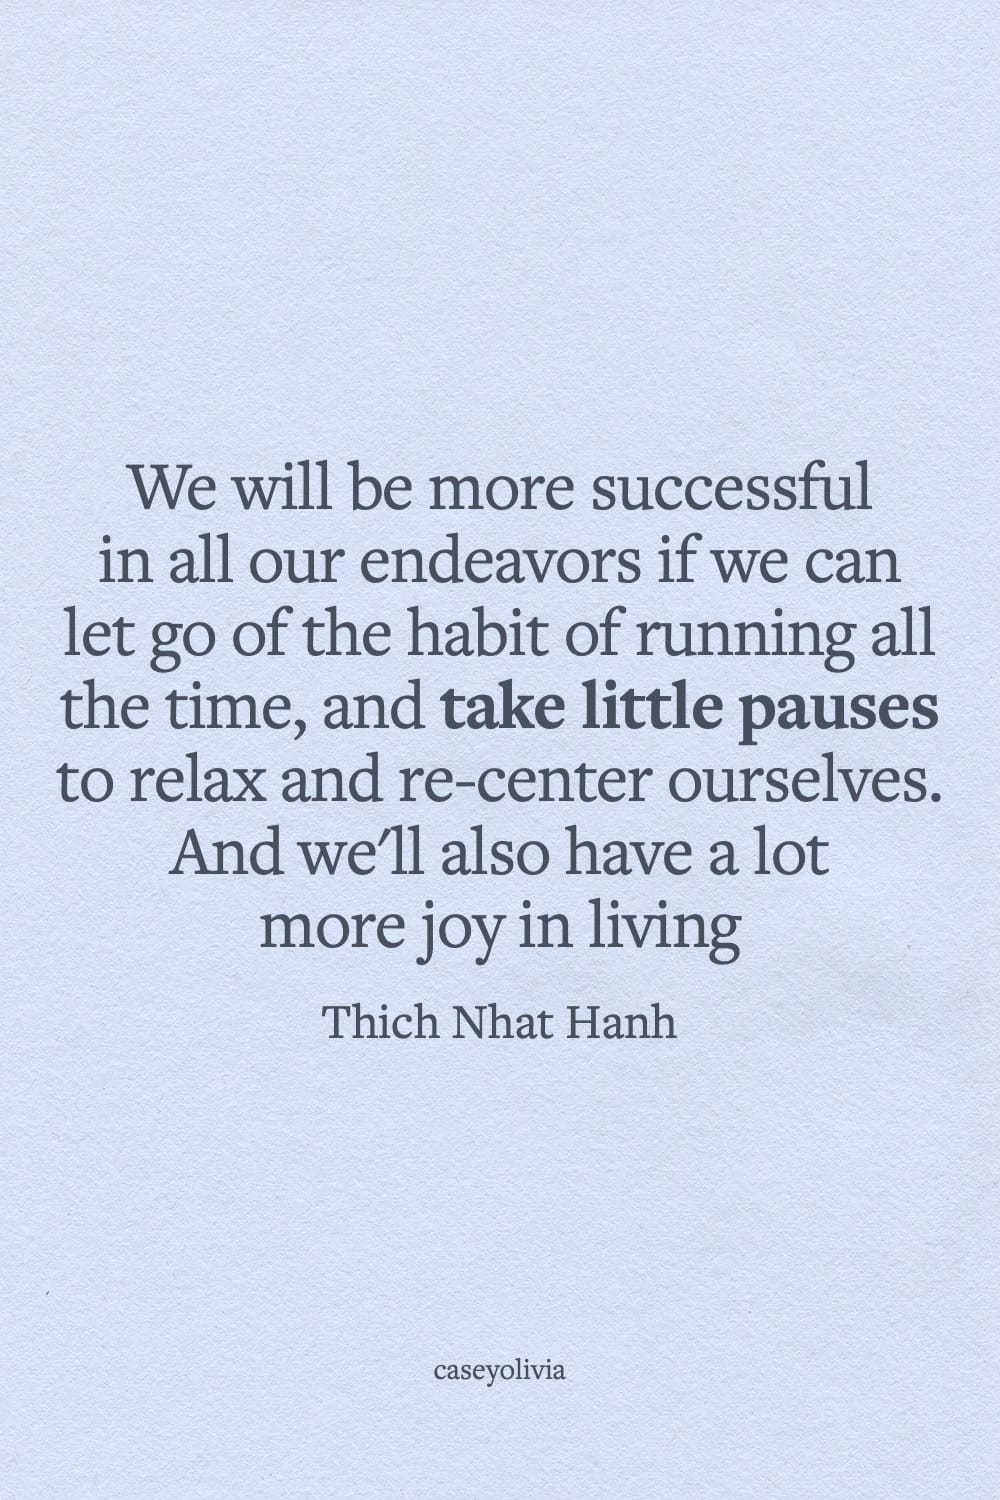 thich nhat hanh let go of the habit of running all the time